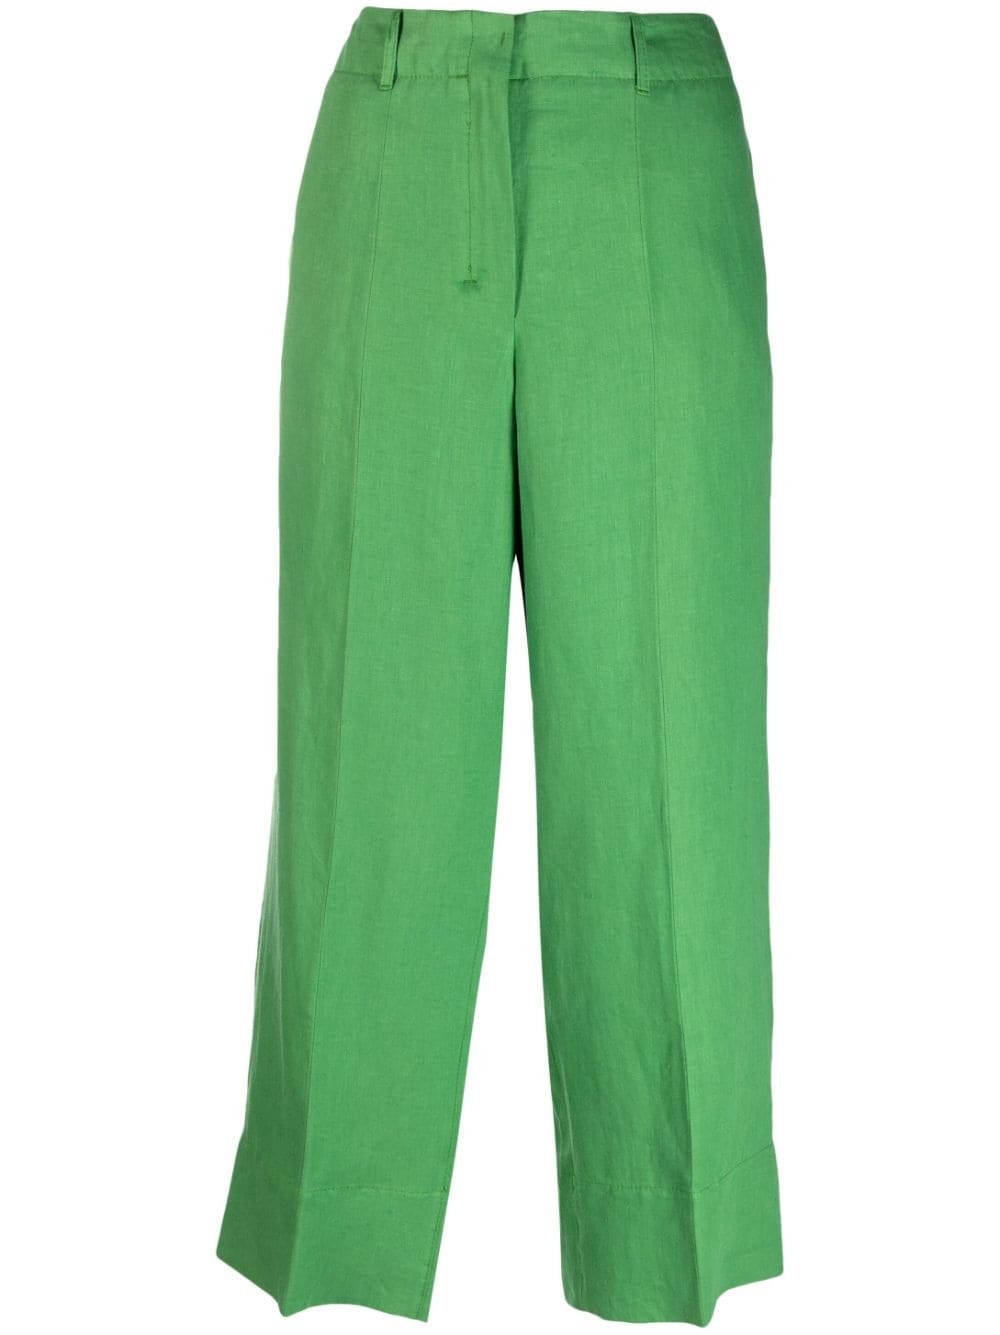 Max Mara Tailored Linen Cropped Trousers - Farfetch